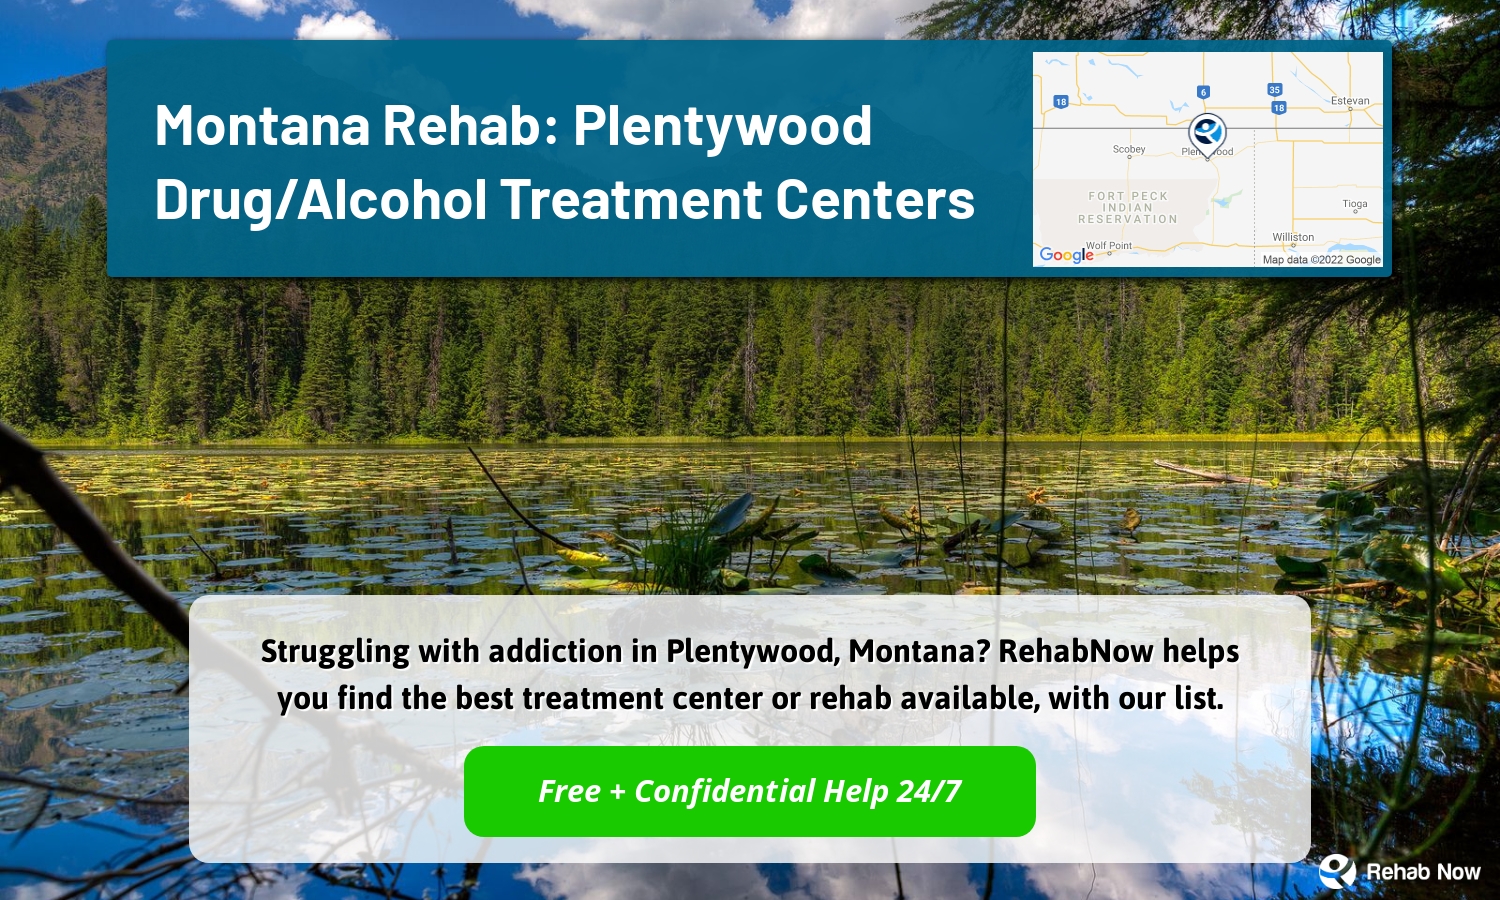 Struggling with addiction in Plentywood, Montana? RehabNow helps you find the best treatment center or rehab available, with our list.